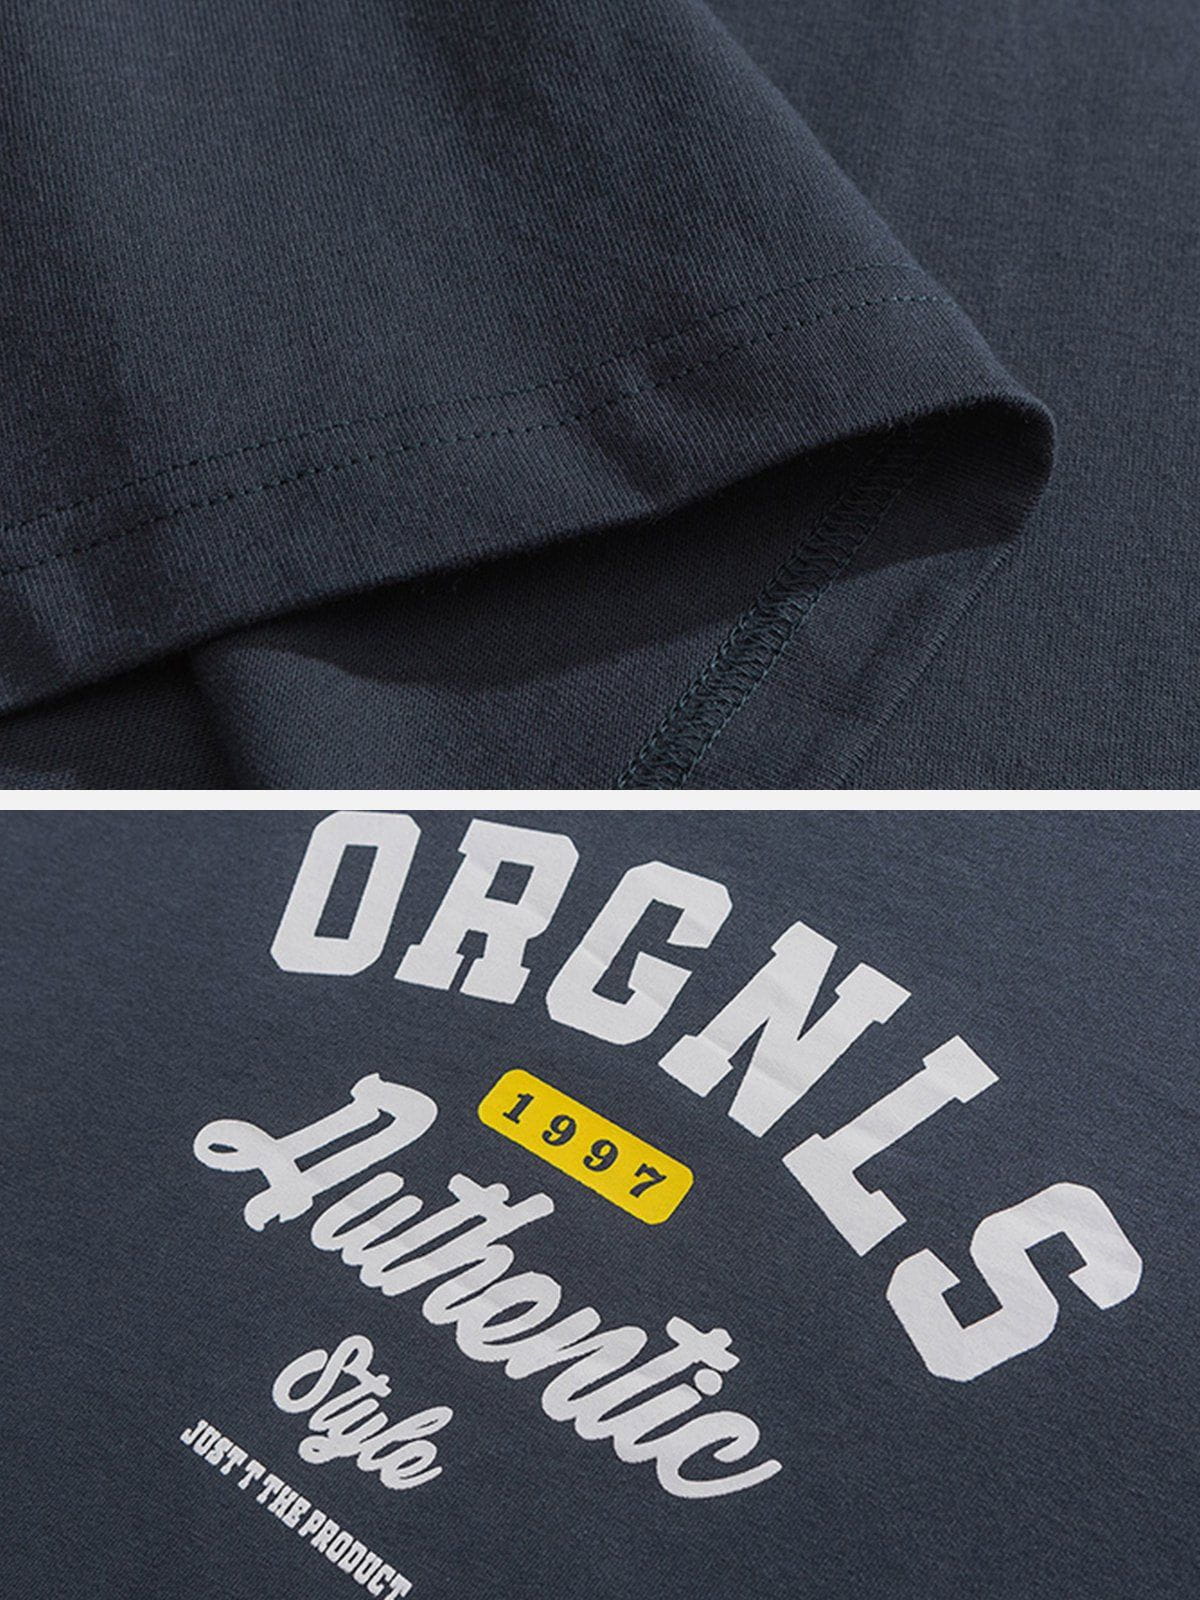 Sneakerland™ - ORGNLS Letter Print Tee